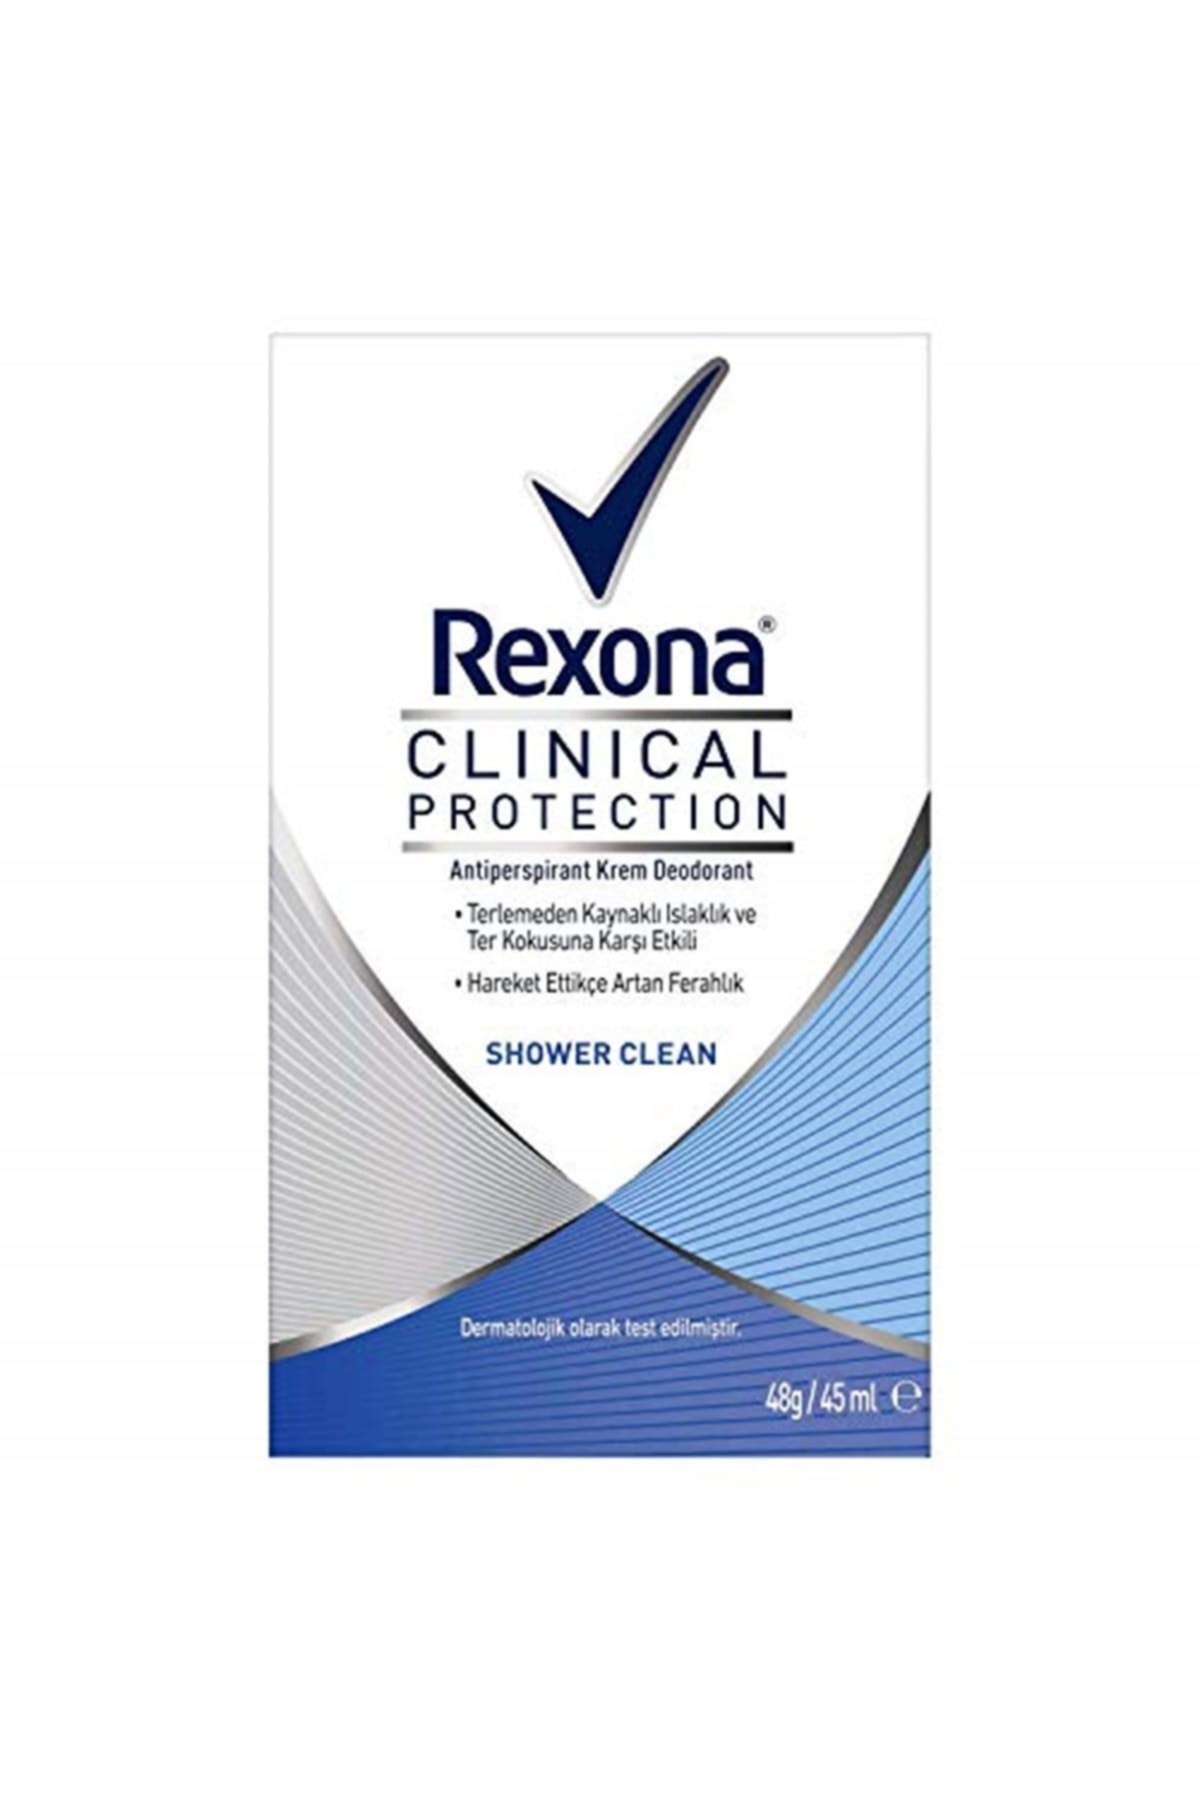 Rexon A Clinical Protection Antiperspirant Stick Shower Clean